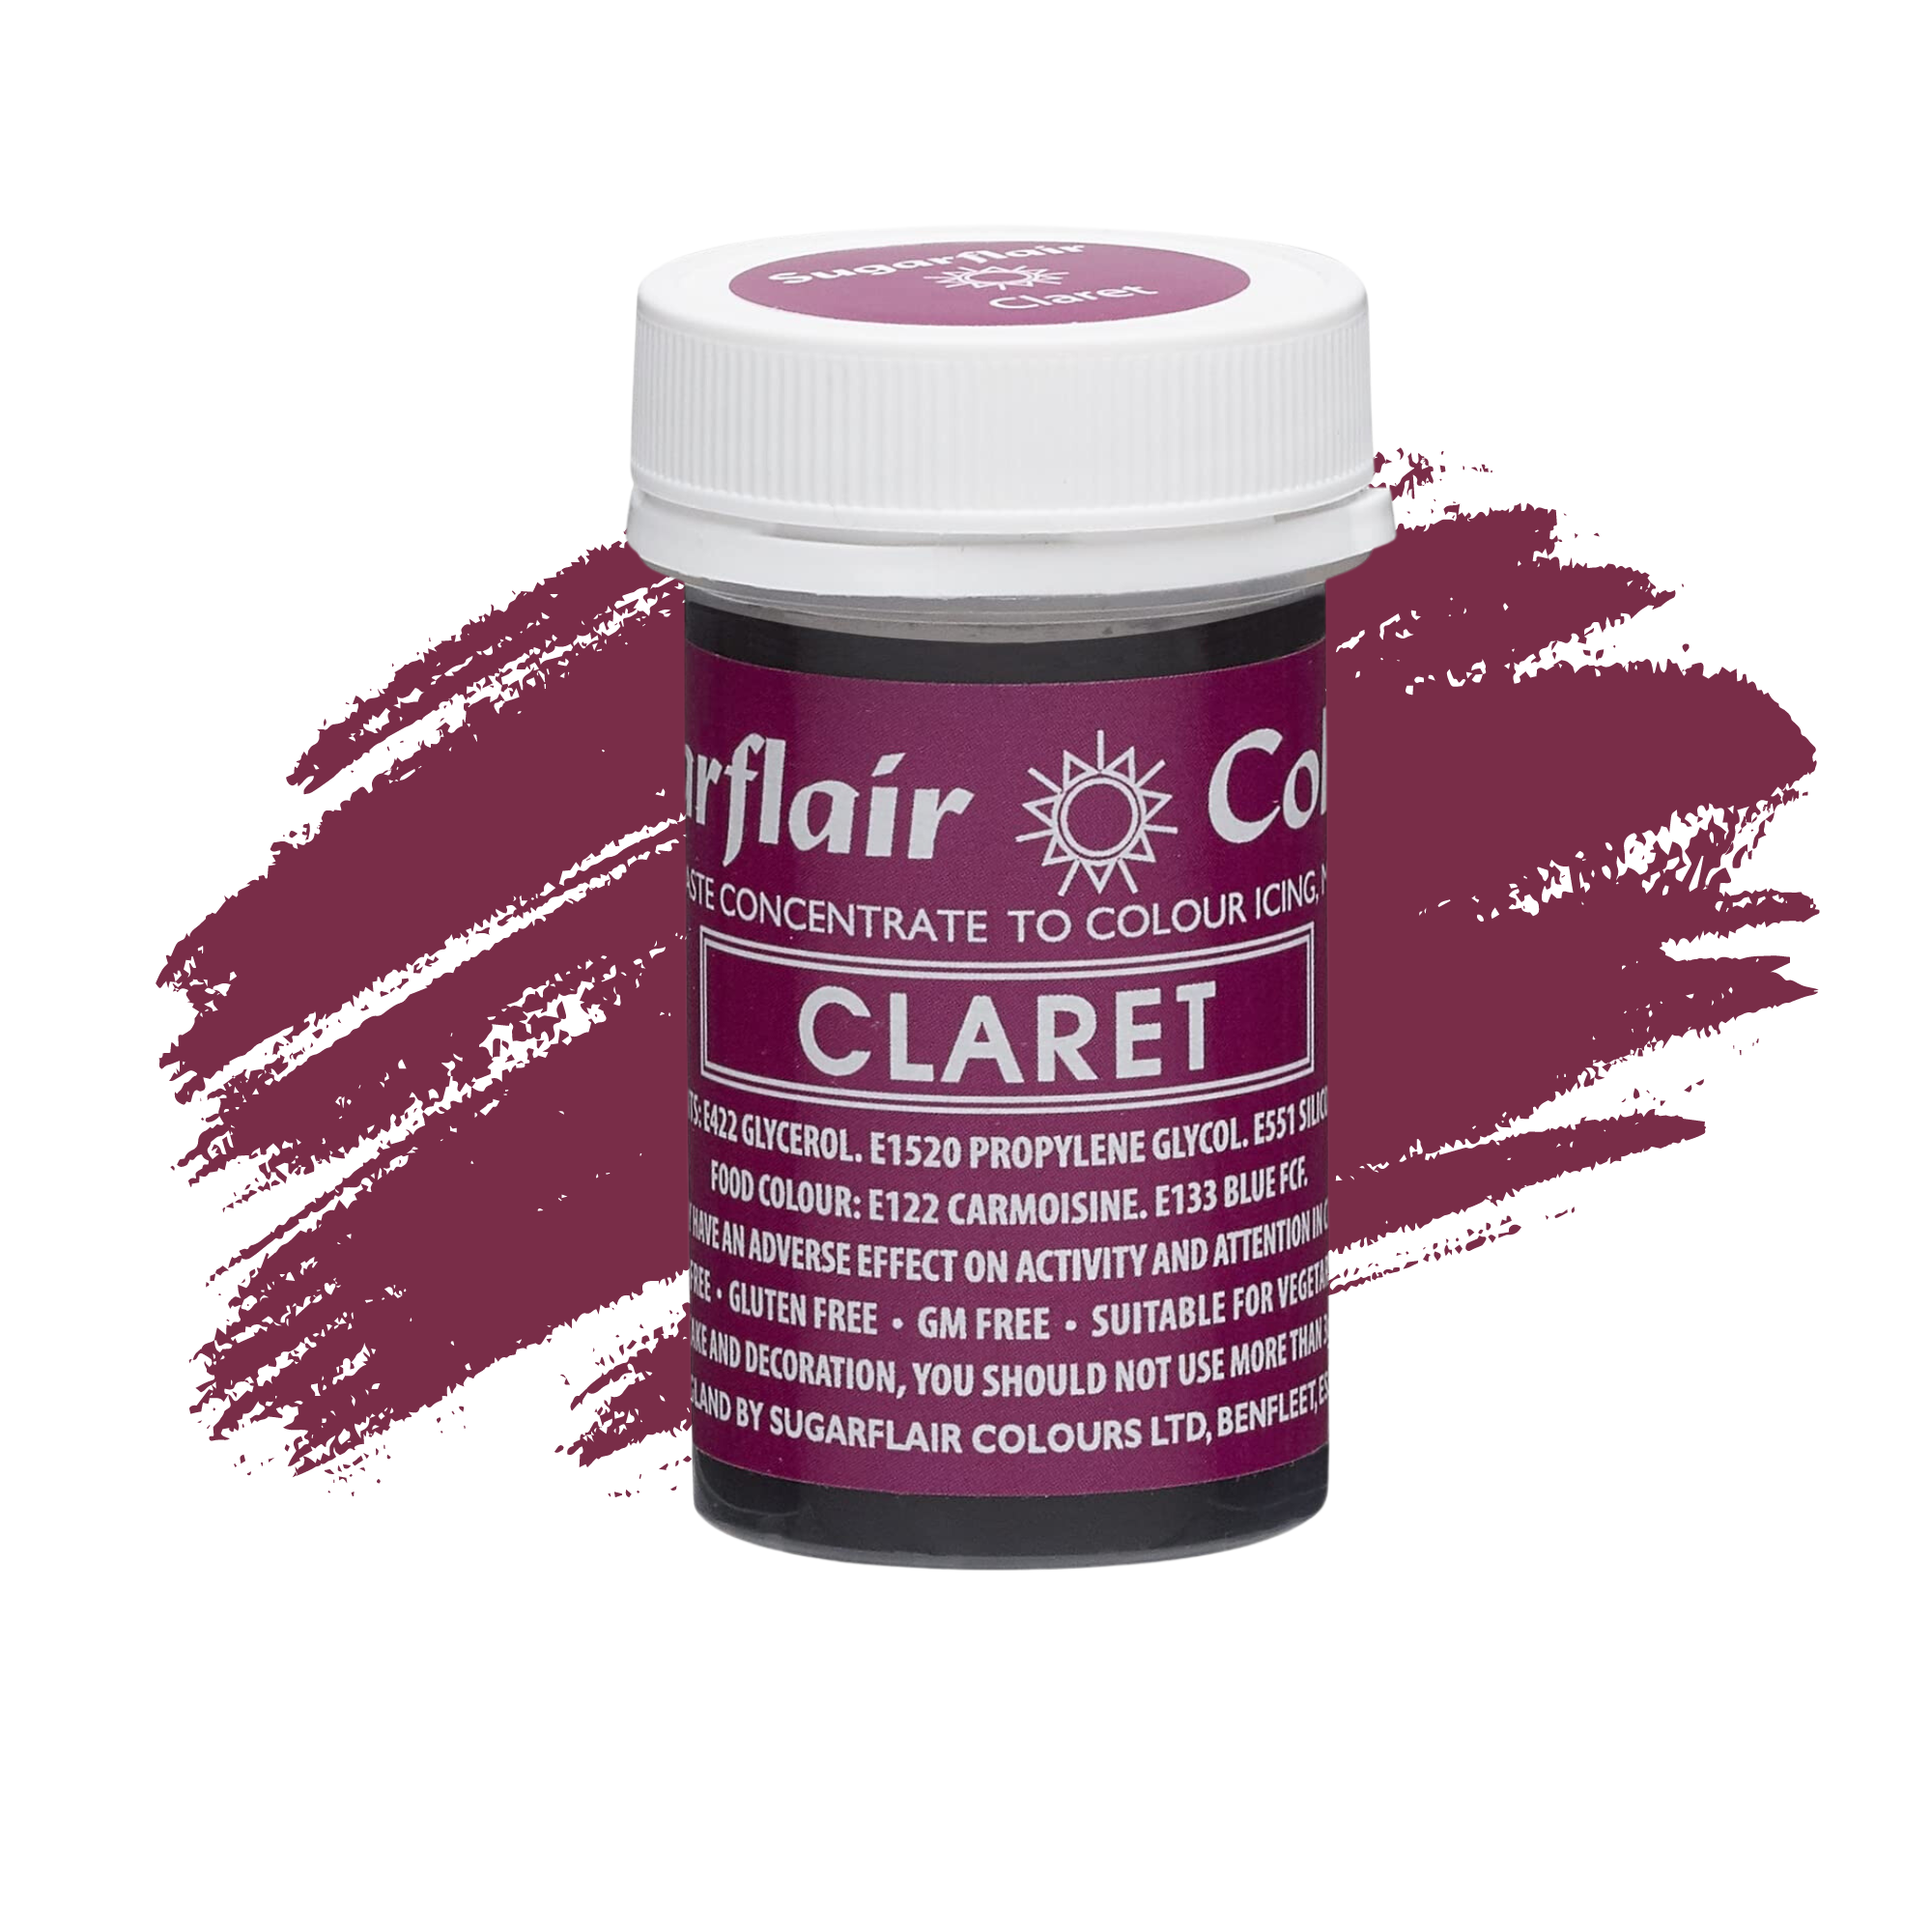 Sugarflair Paste Colours Concentrated Food Colouring - Spectral Claret - 25g